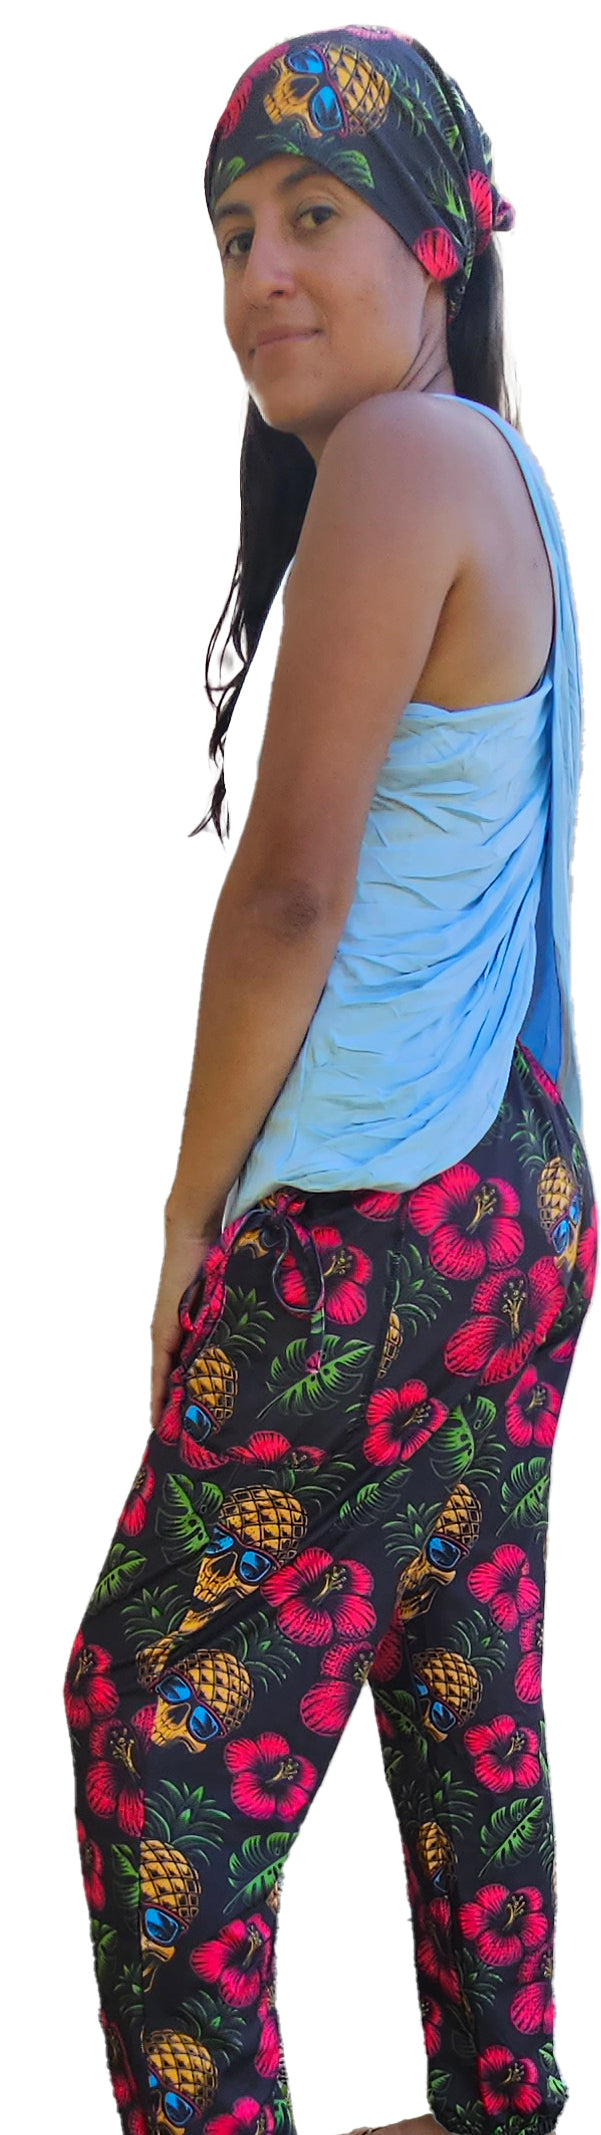 YOGAZ Unisex Pineapple Skull Print Pants with our Signature Pocket in Pocket Design